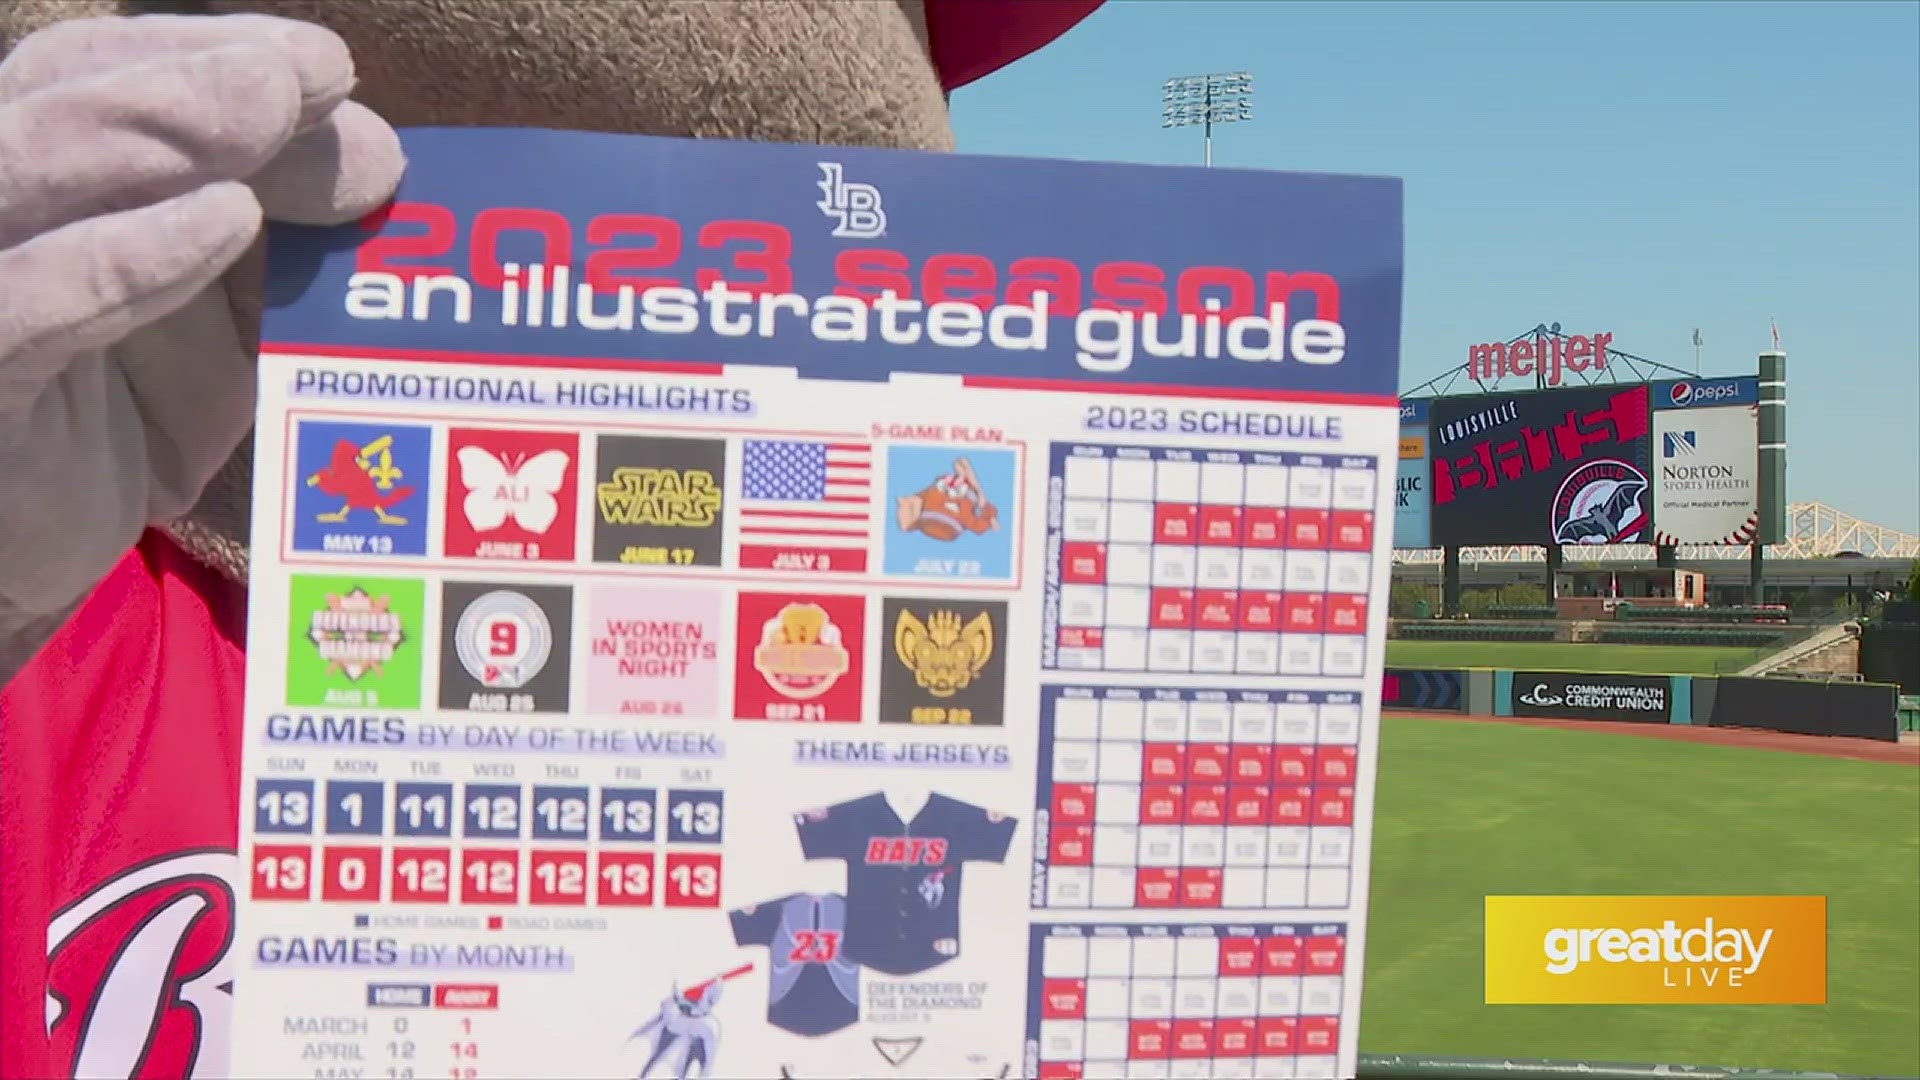 GDL: Check Out the Upcoming Louisville Bats Promotions and Giveaways